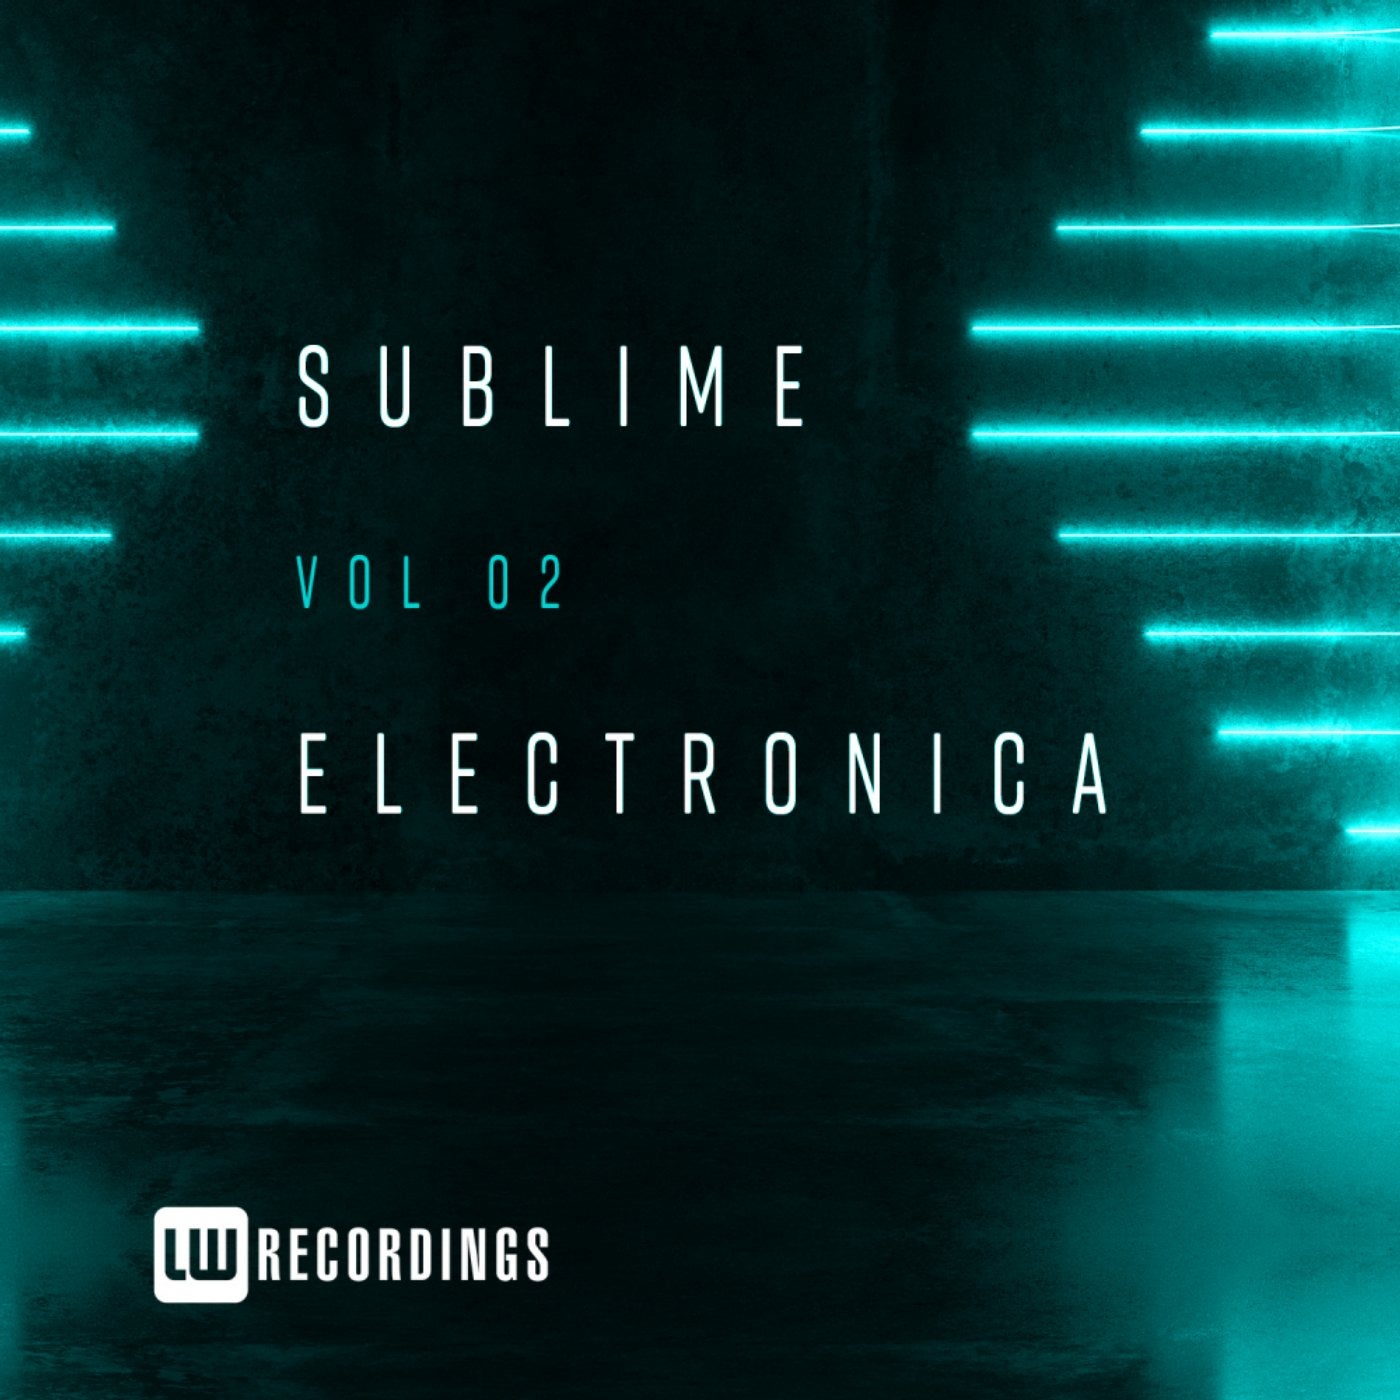 Sublime Electronica, Vol. 02